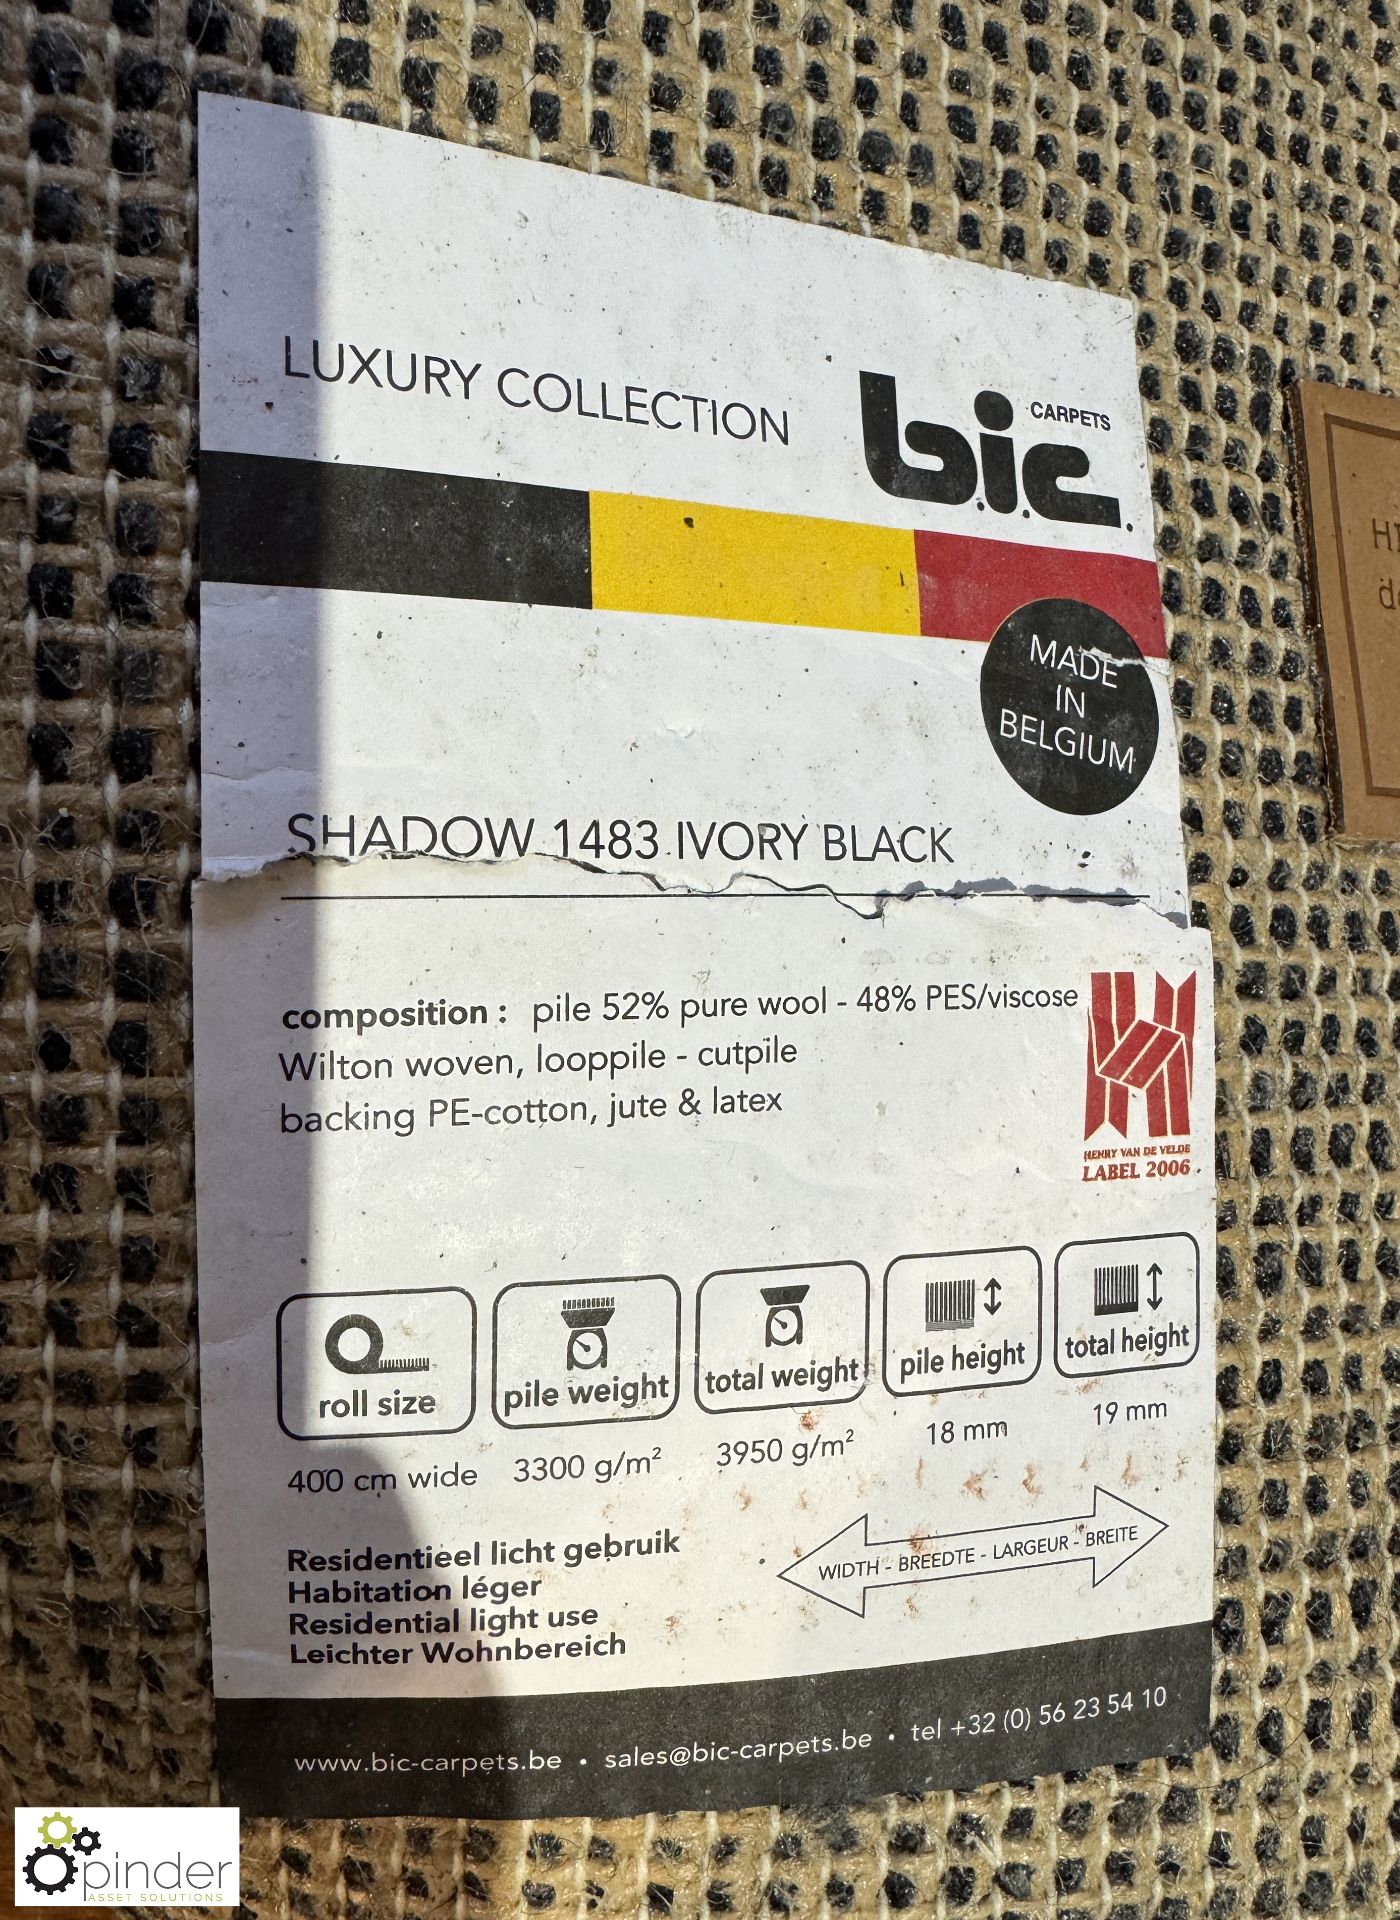 BIC Luxury Rug “Shadow 1483 Ivory Black”, 6450mm x 4000mm (location in building – level 22) - Image 4 of 6